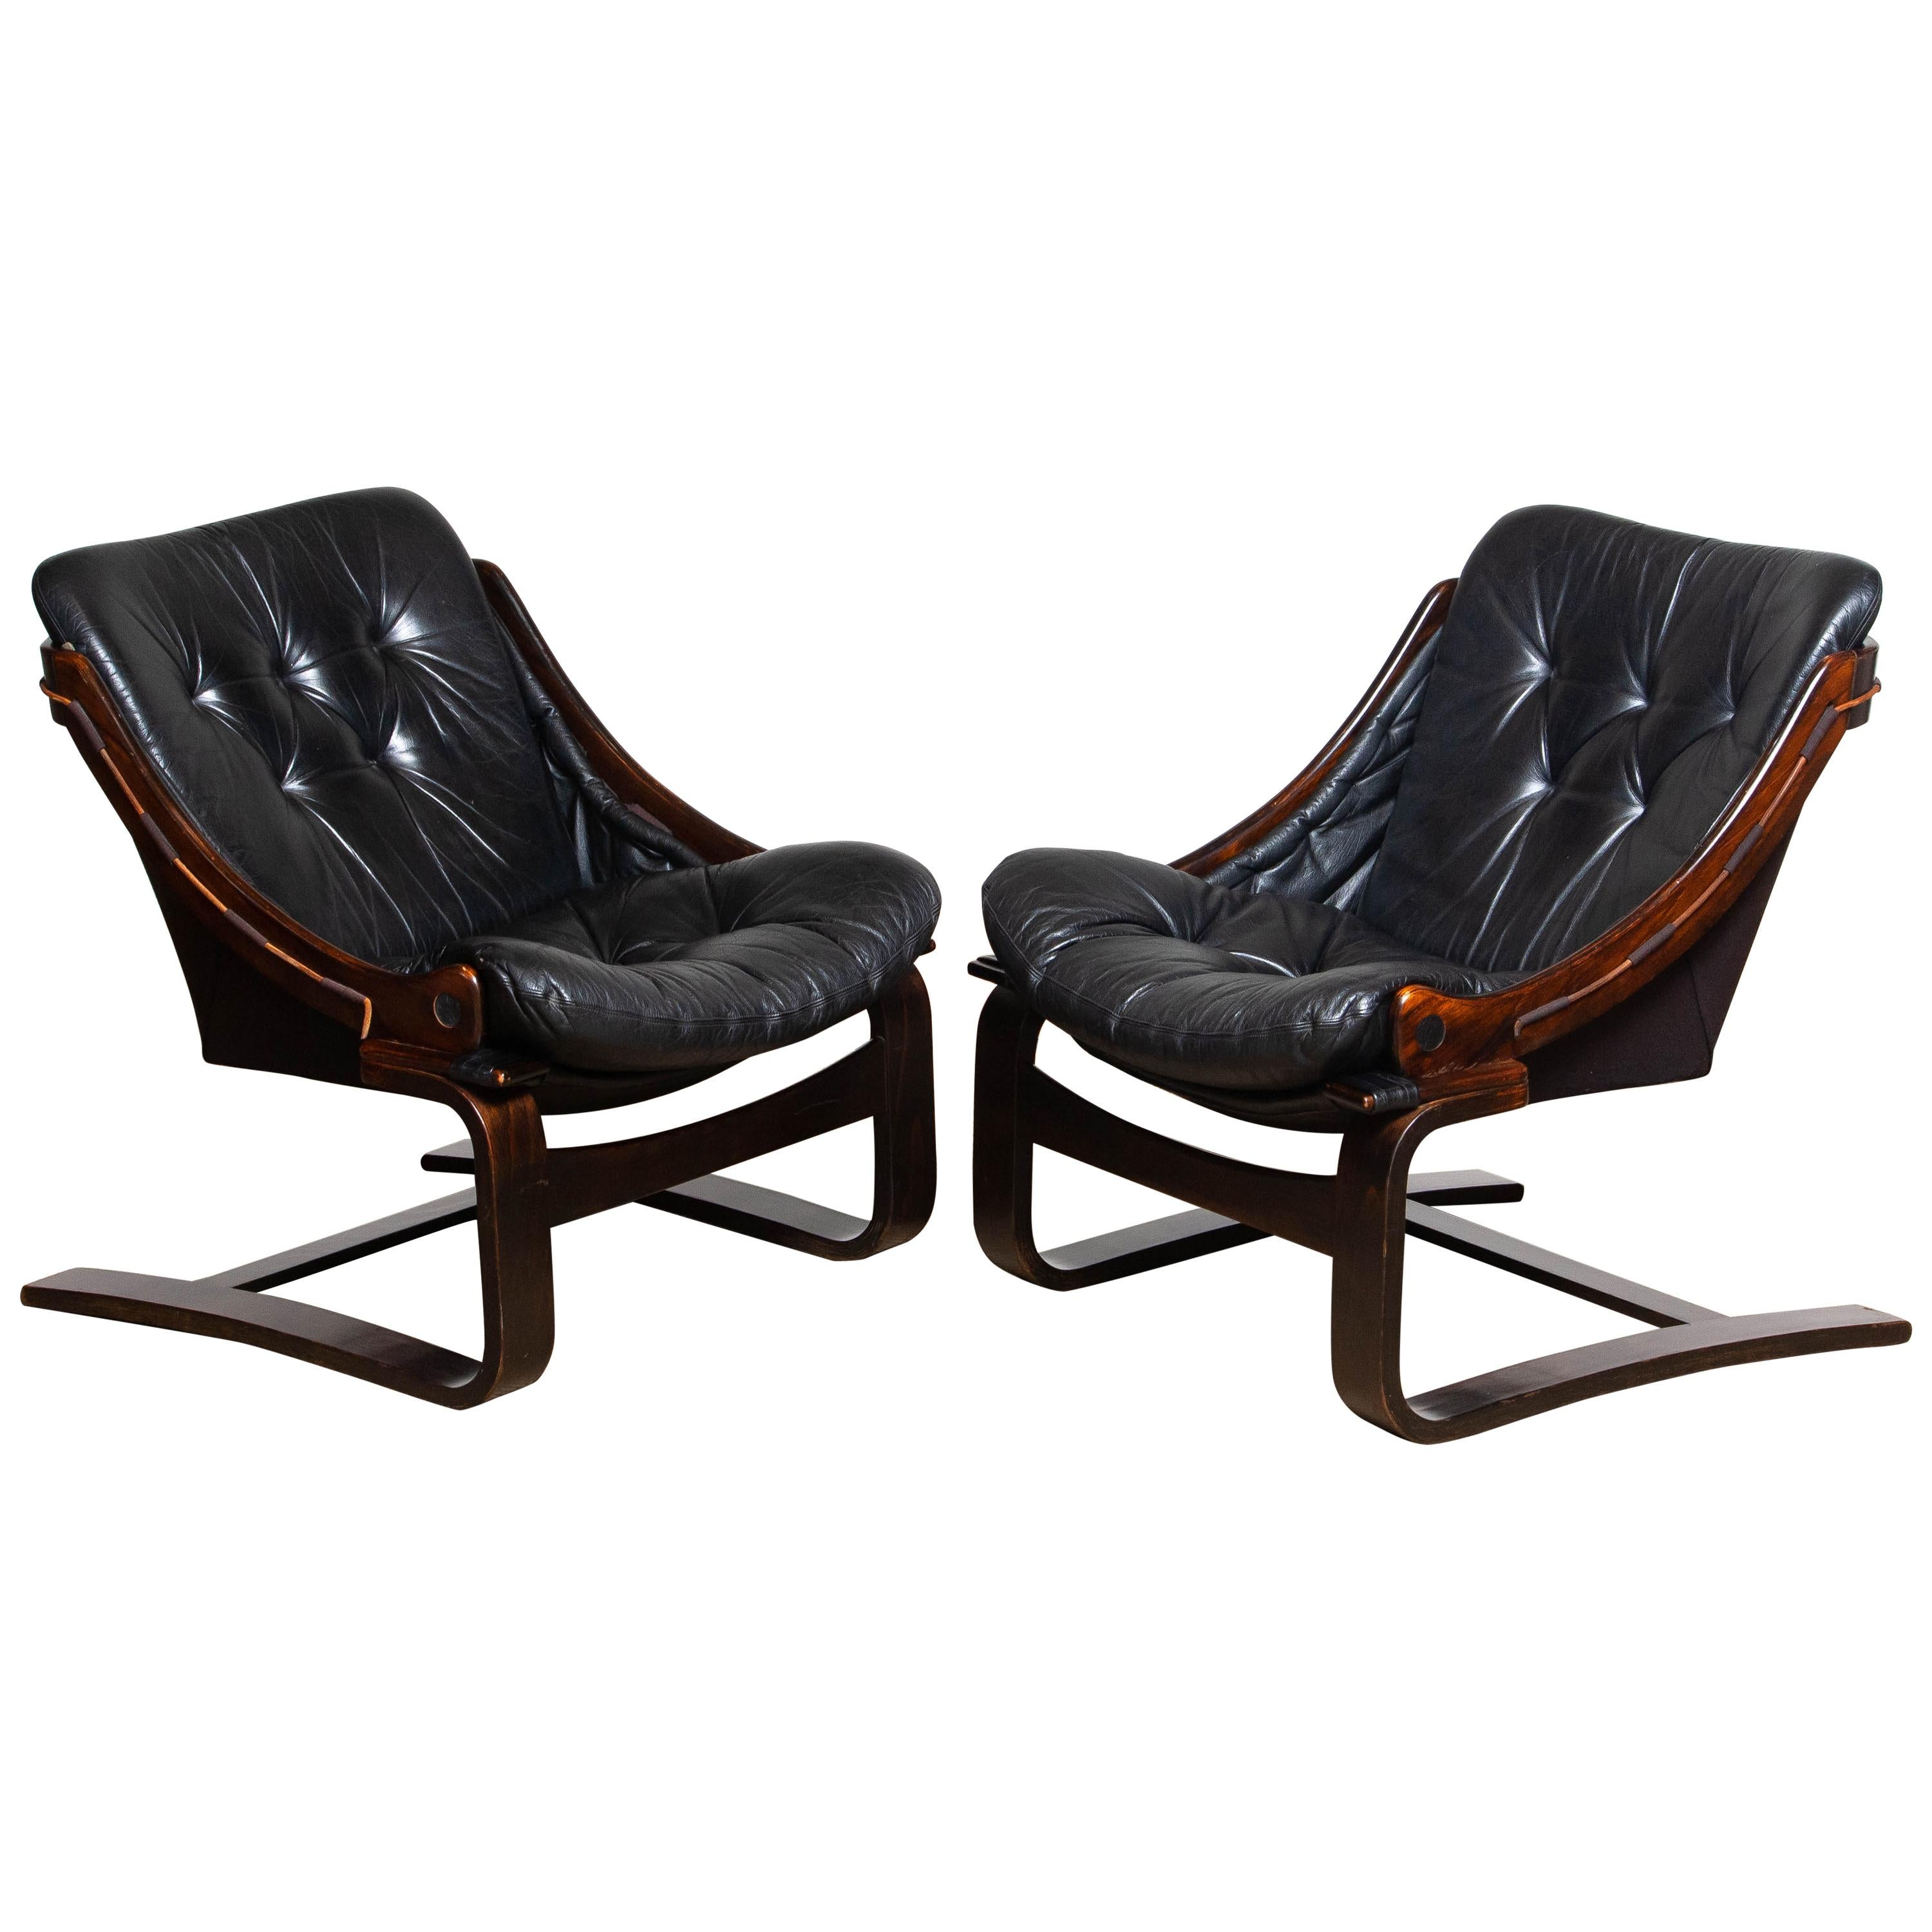 1970's Pair Black Leather Club / Lounge Chairs by Ake Fribytter for Nelo Sweden